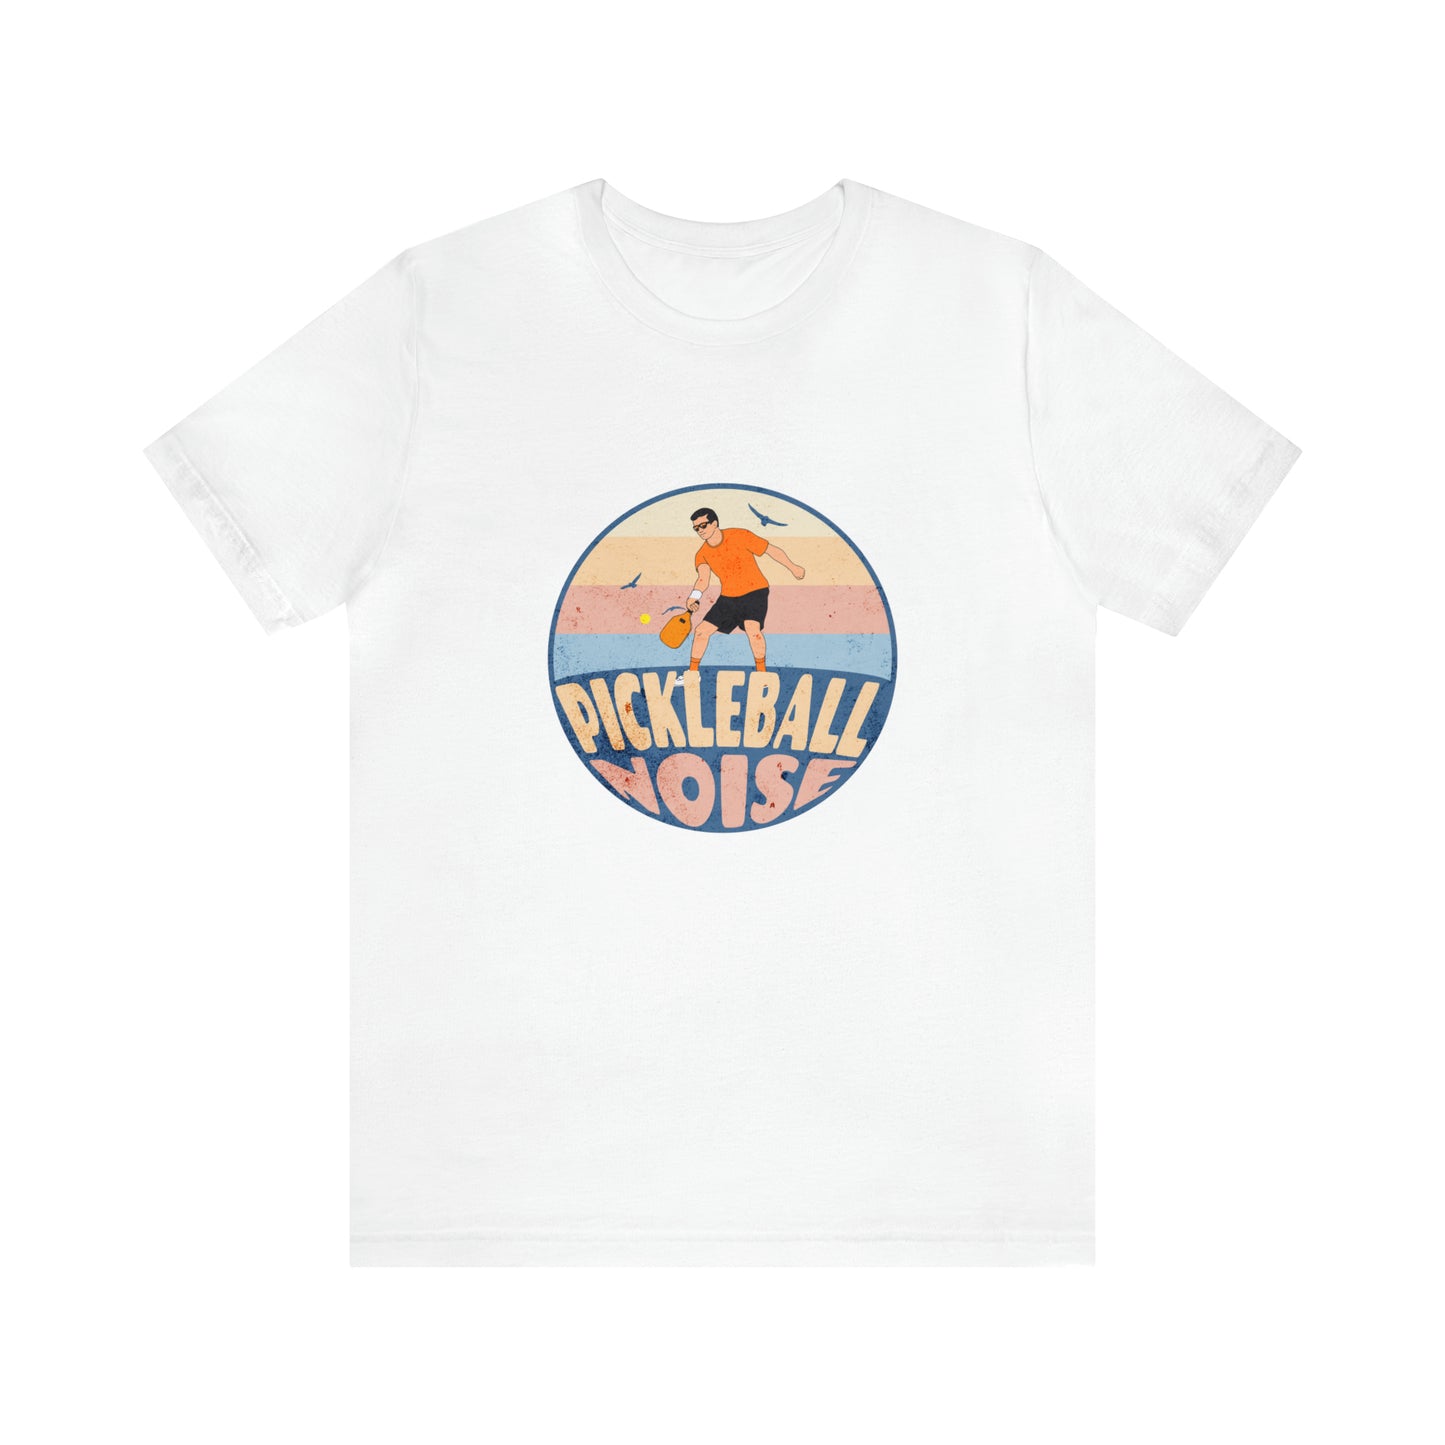 Pickleball Noise T-Shirt: Embrace the Sound